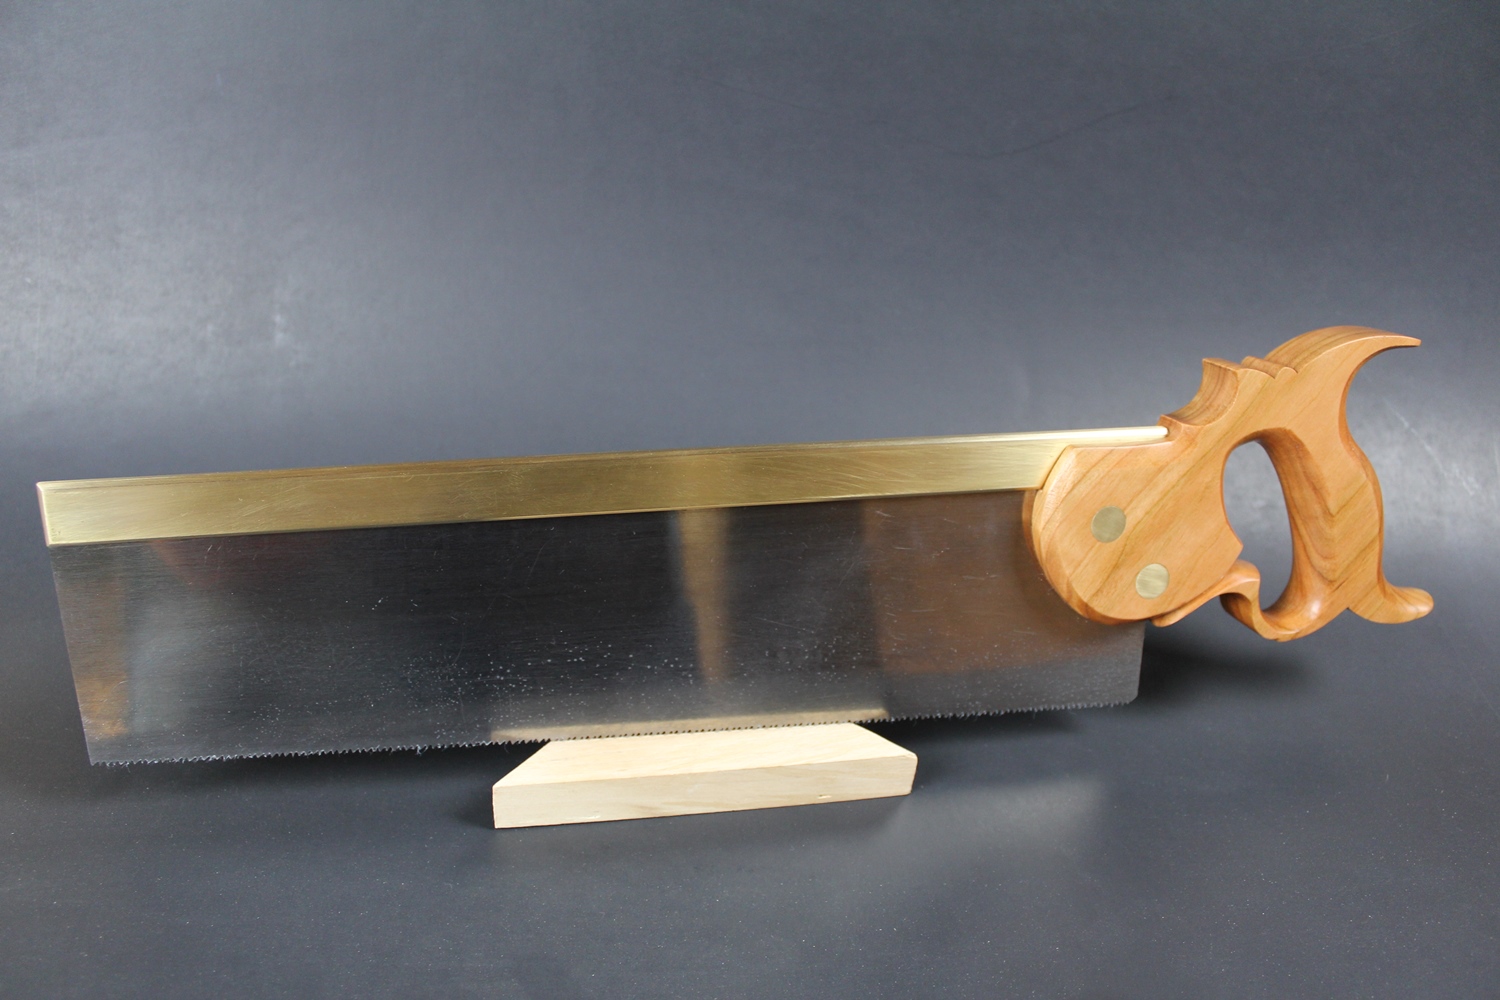 The blade is 14" long and 13 PPI, filed crosscut. The milled brass back came from Blackburn Tools, the saw bolts came from TGIAG. The saw blade was custom cut and filed by me.